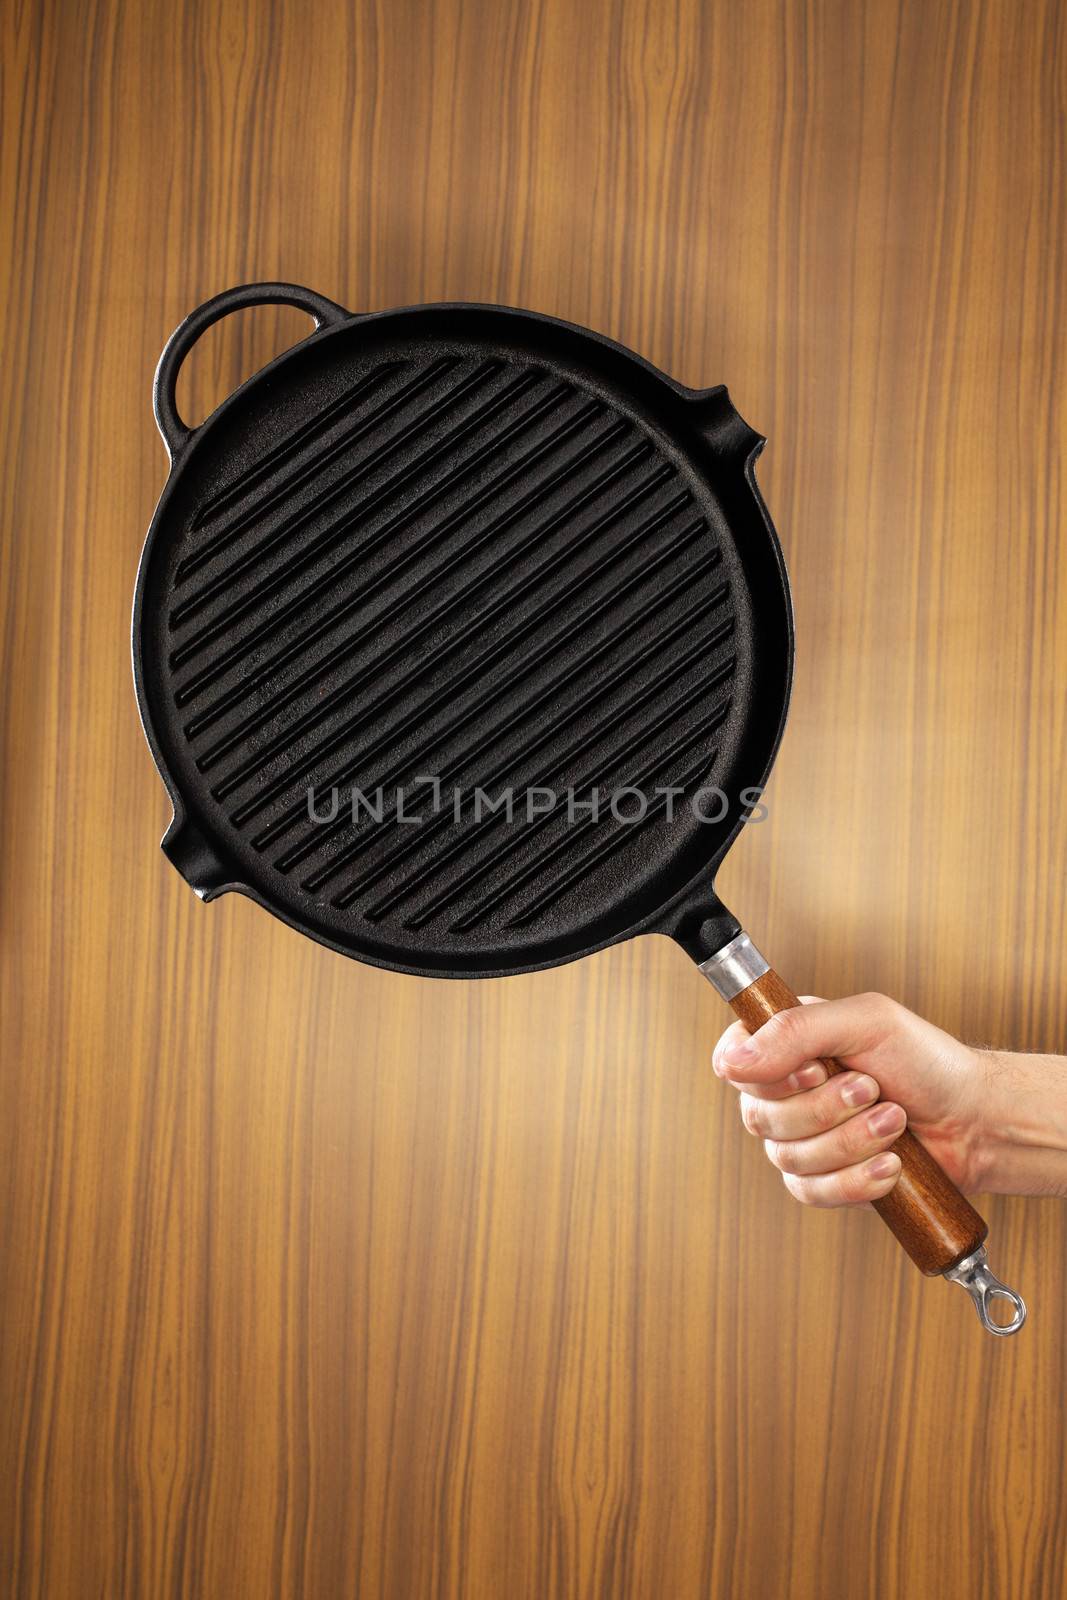 Cast iron grill pan by Stocksnapper